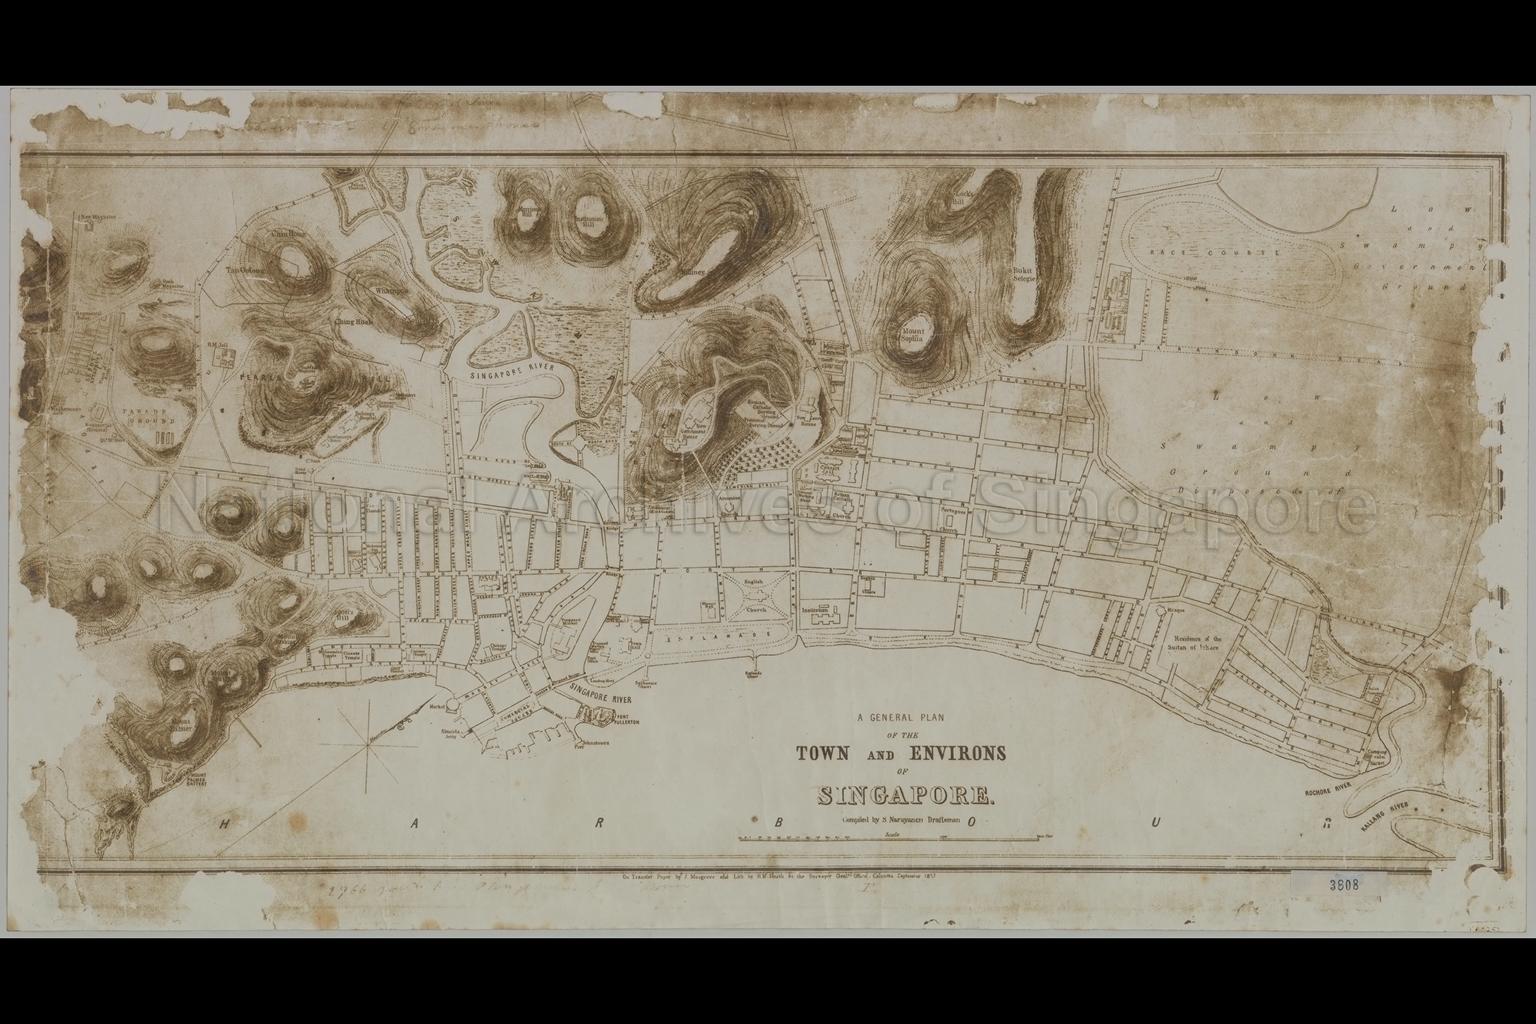 A General Plan of the Town and Environs of Singapore